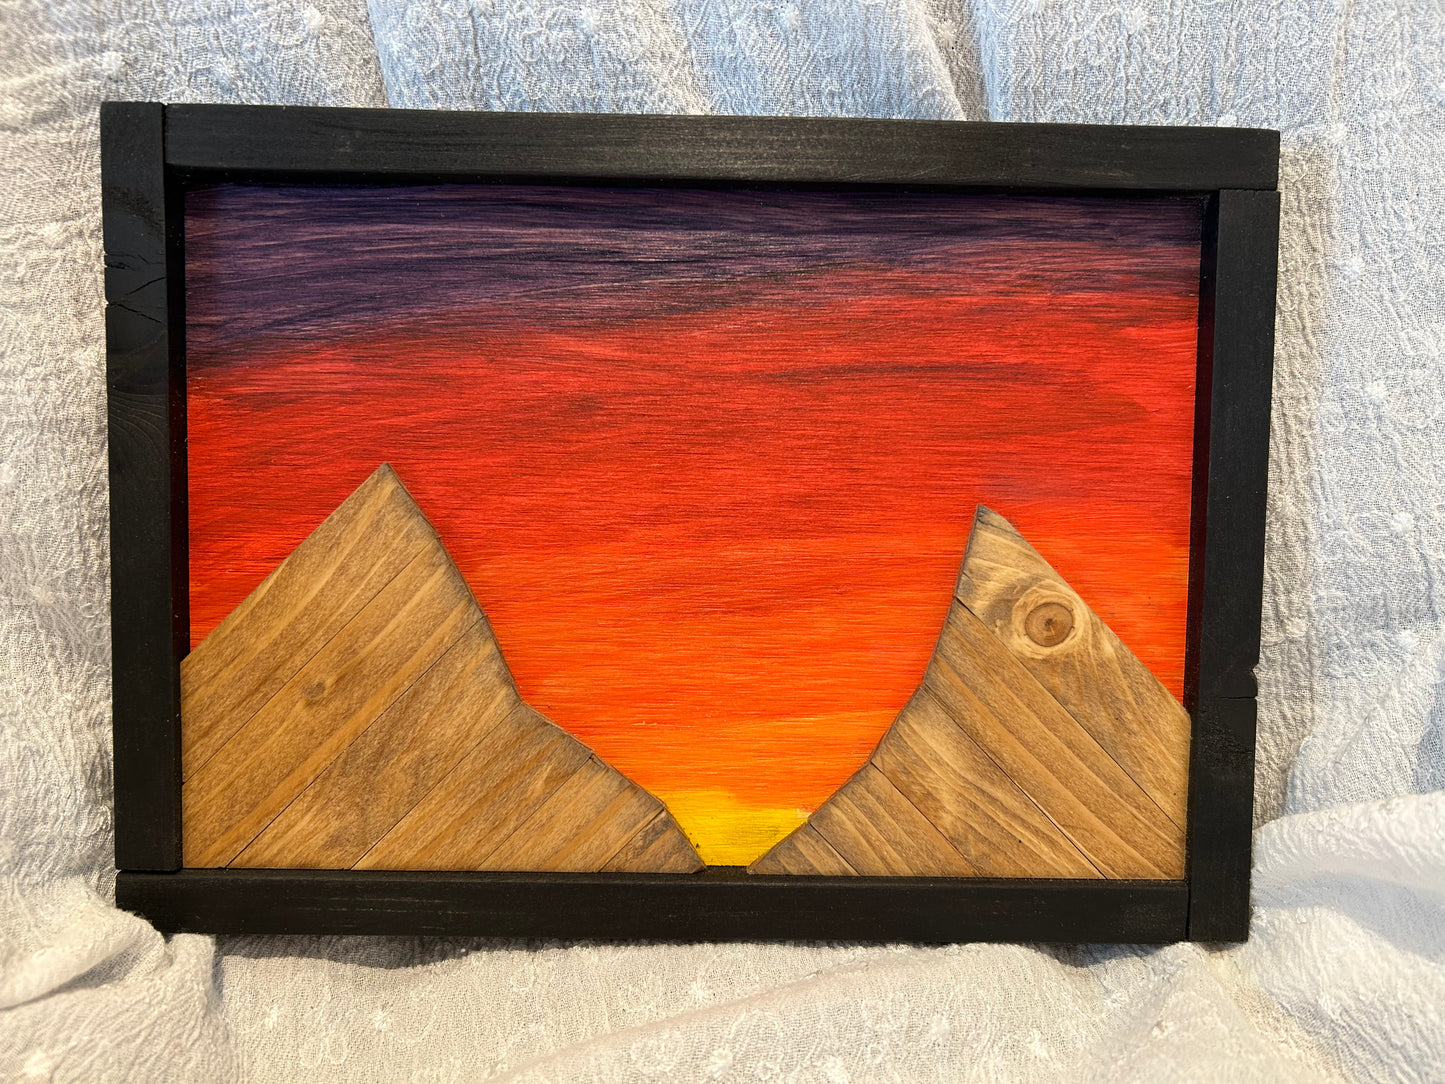 The Harrison Collection- Small Sunset Mountains